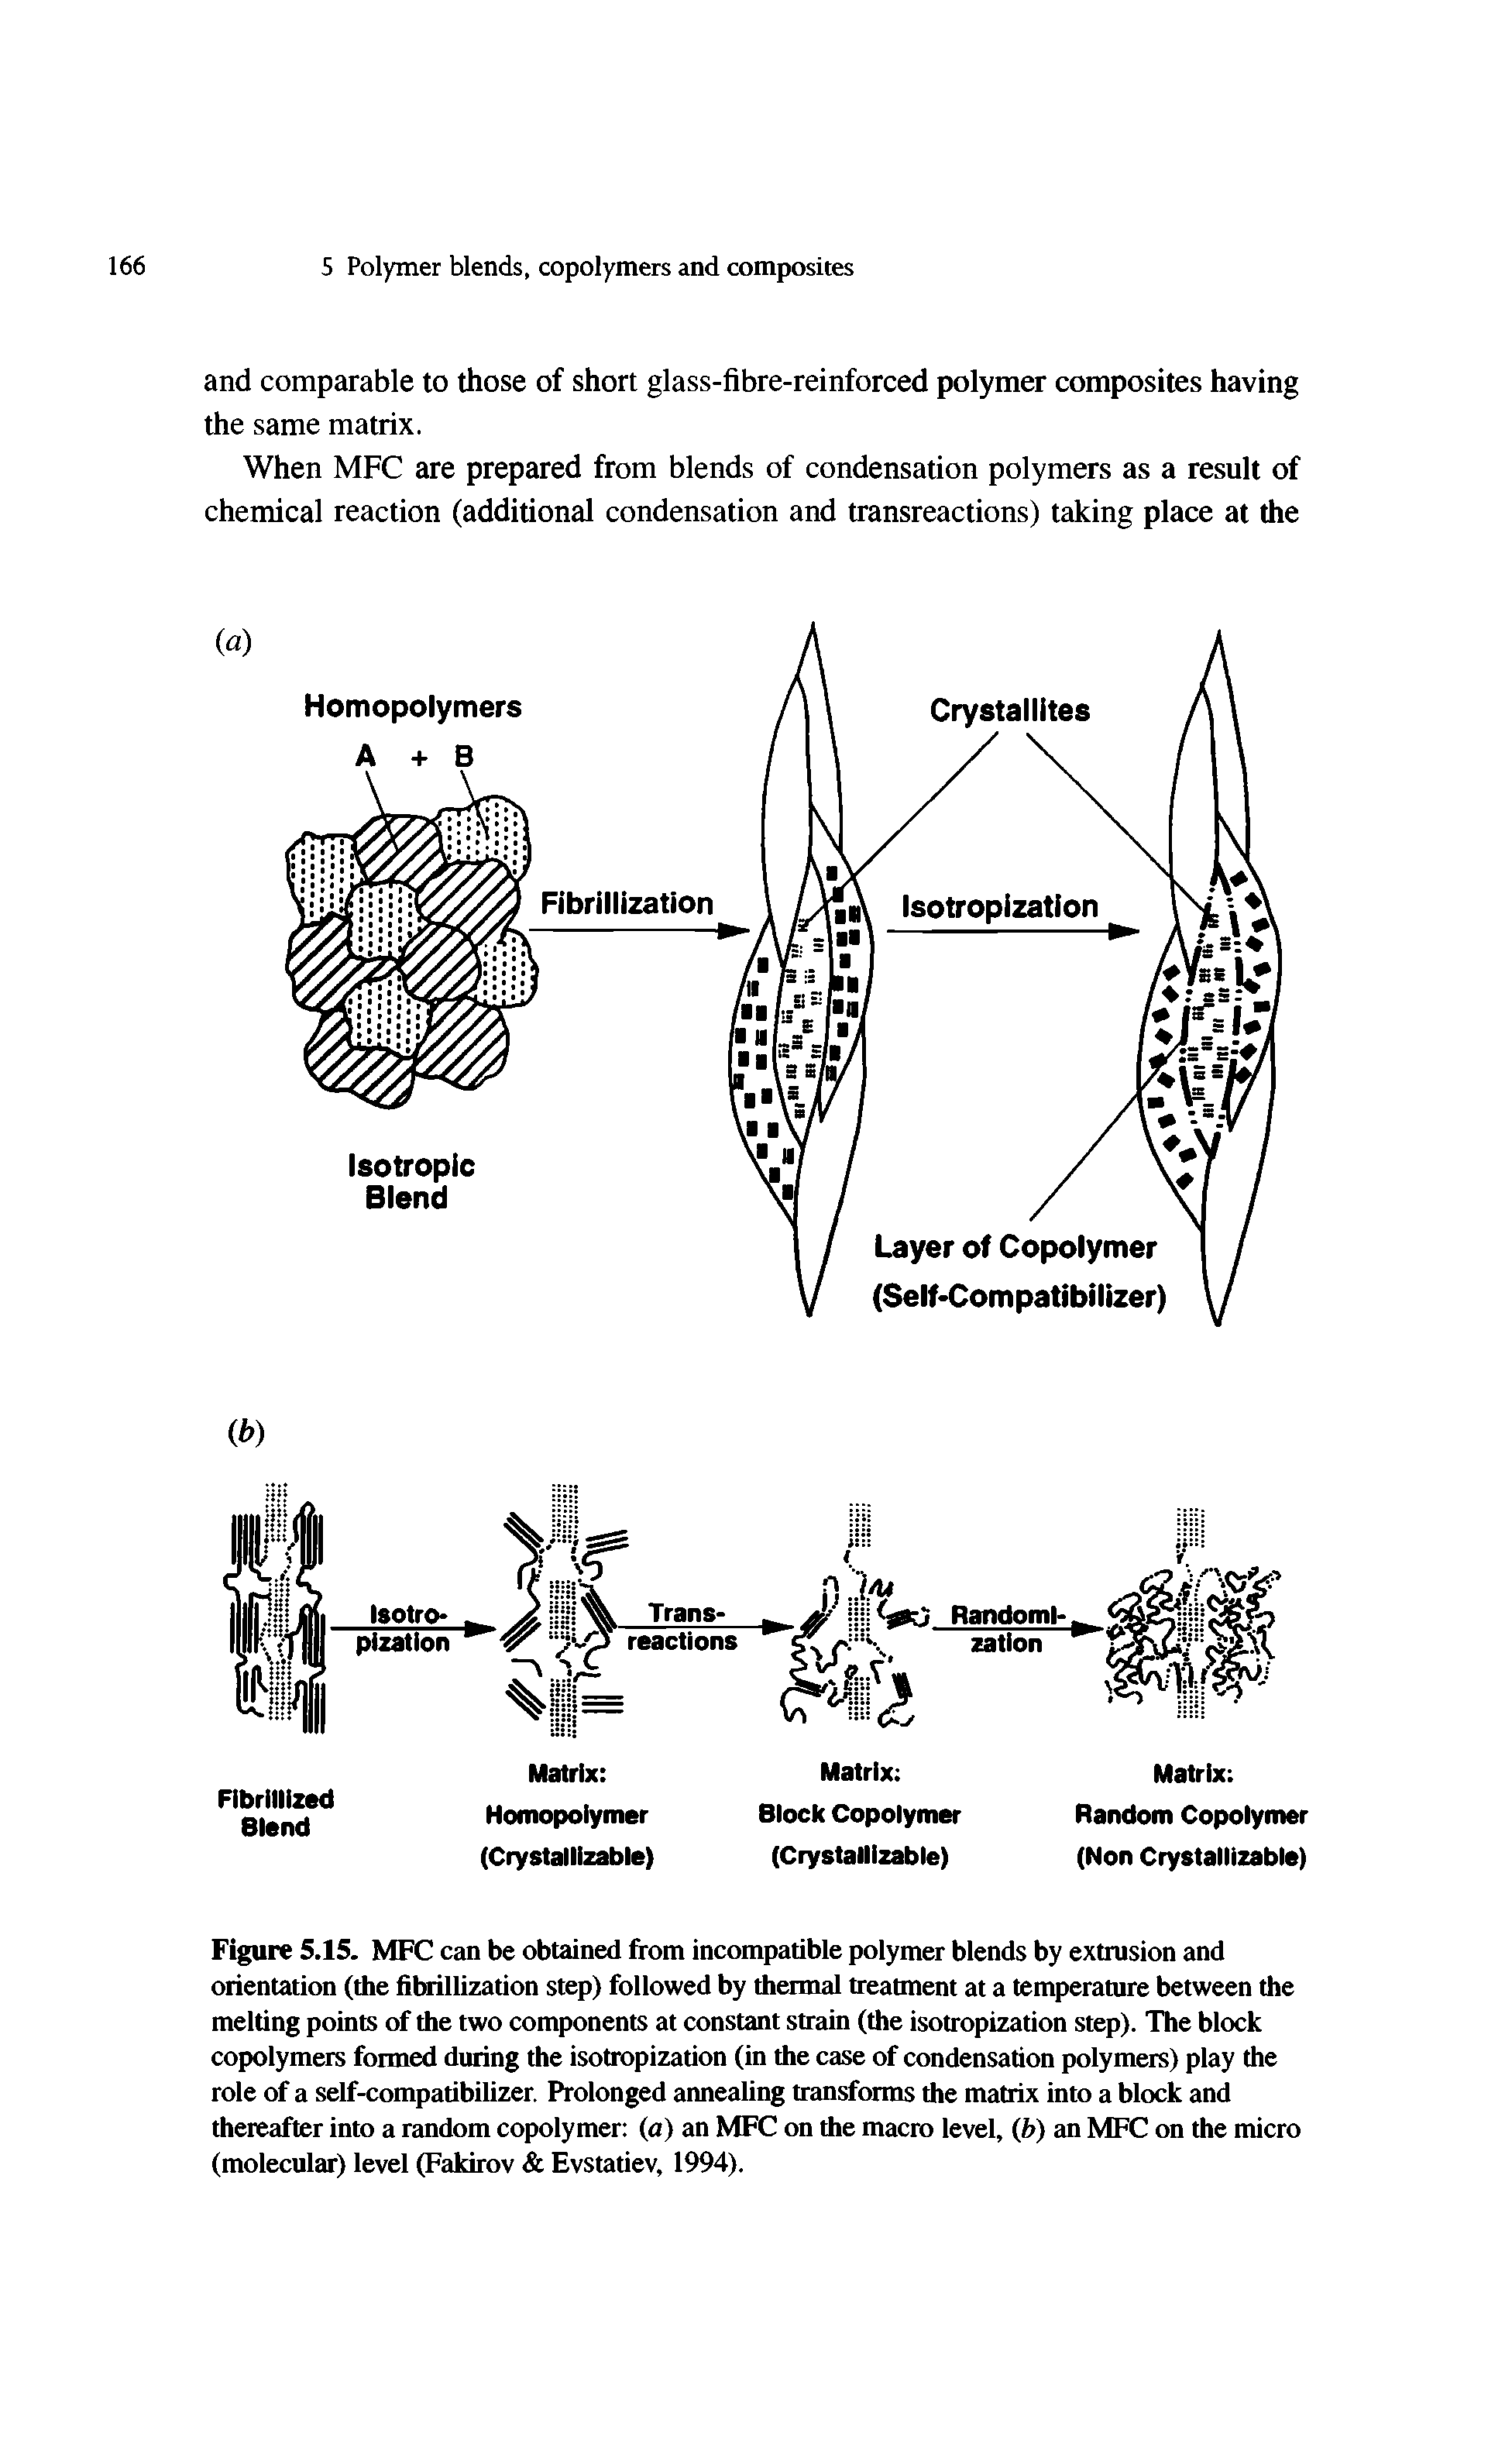 Figure 5.15. MFC can be obtained from incompatible polymer blends by extrusion and orientation (the fibrillization step) followed by thermal treatment at a temperature between the melting points of the two components at constant strain (the isotropization step). The block copolymers formed during the isotropization (in the case of condensation polymers) play the role of a self-compatibilizer. Prolonged annealing transforms the matrix into a block and thereafter into a random copolymer (a) an MFC on the macro level, (b) an MFC on the micro (molecular) level (Fakirov Evstatiev, 1994).